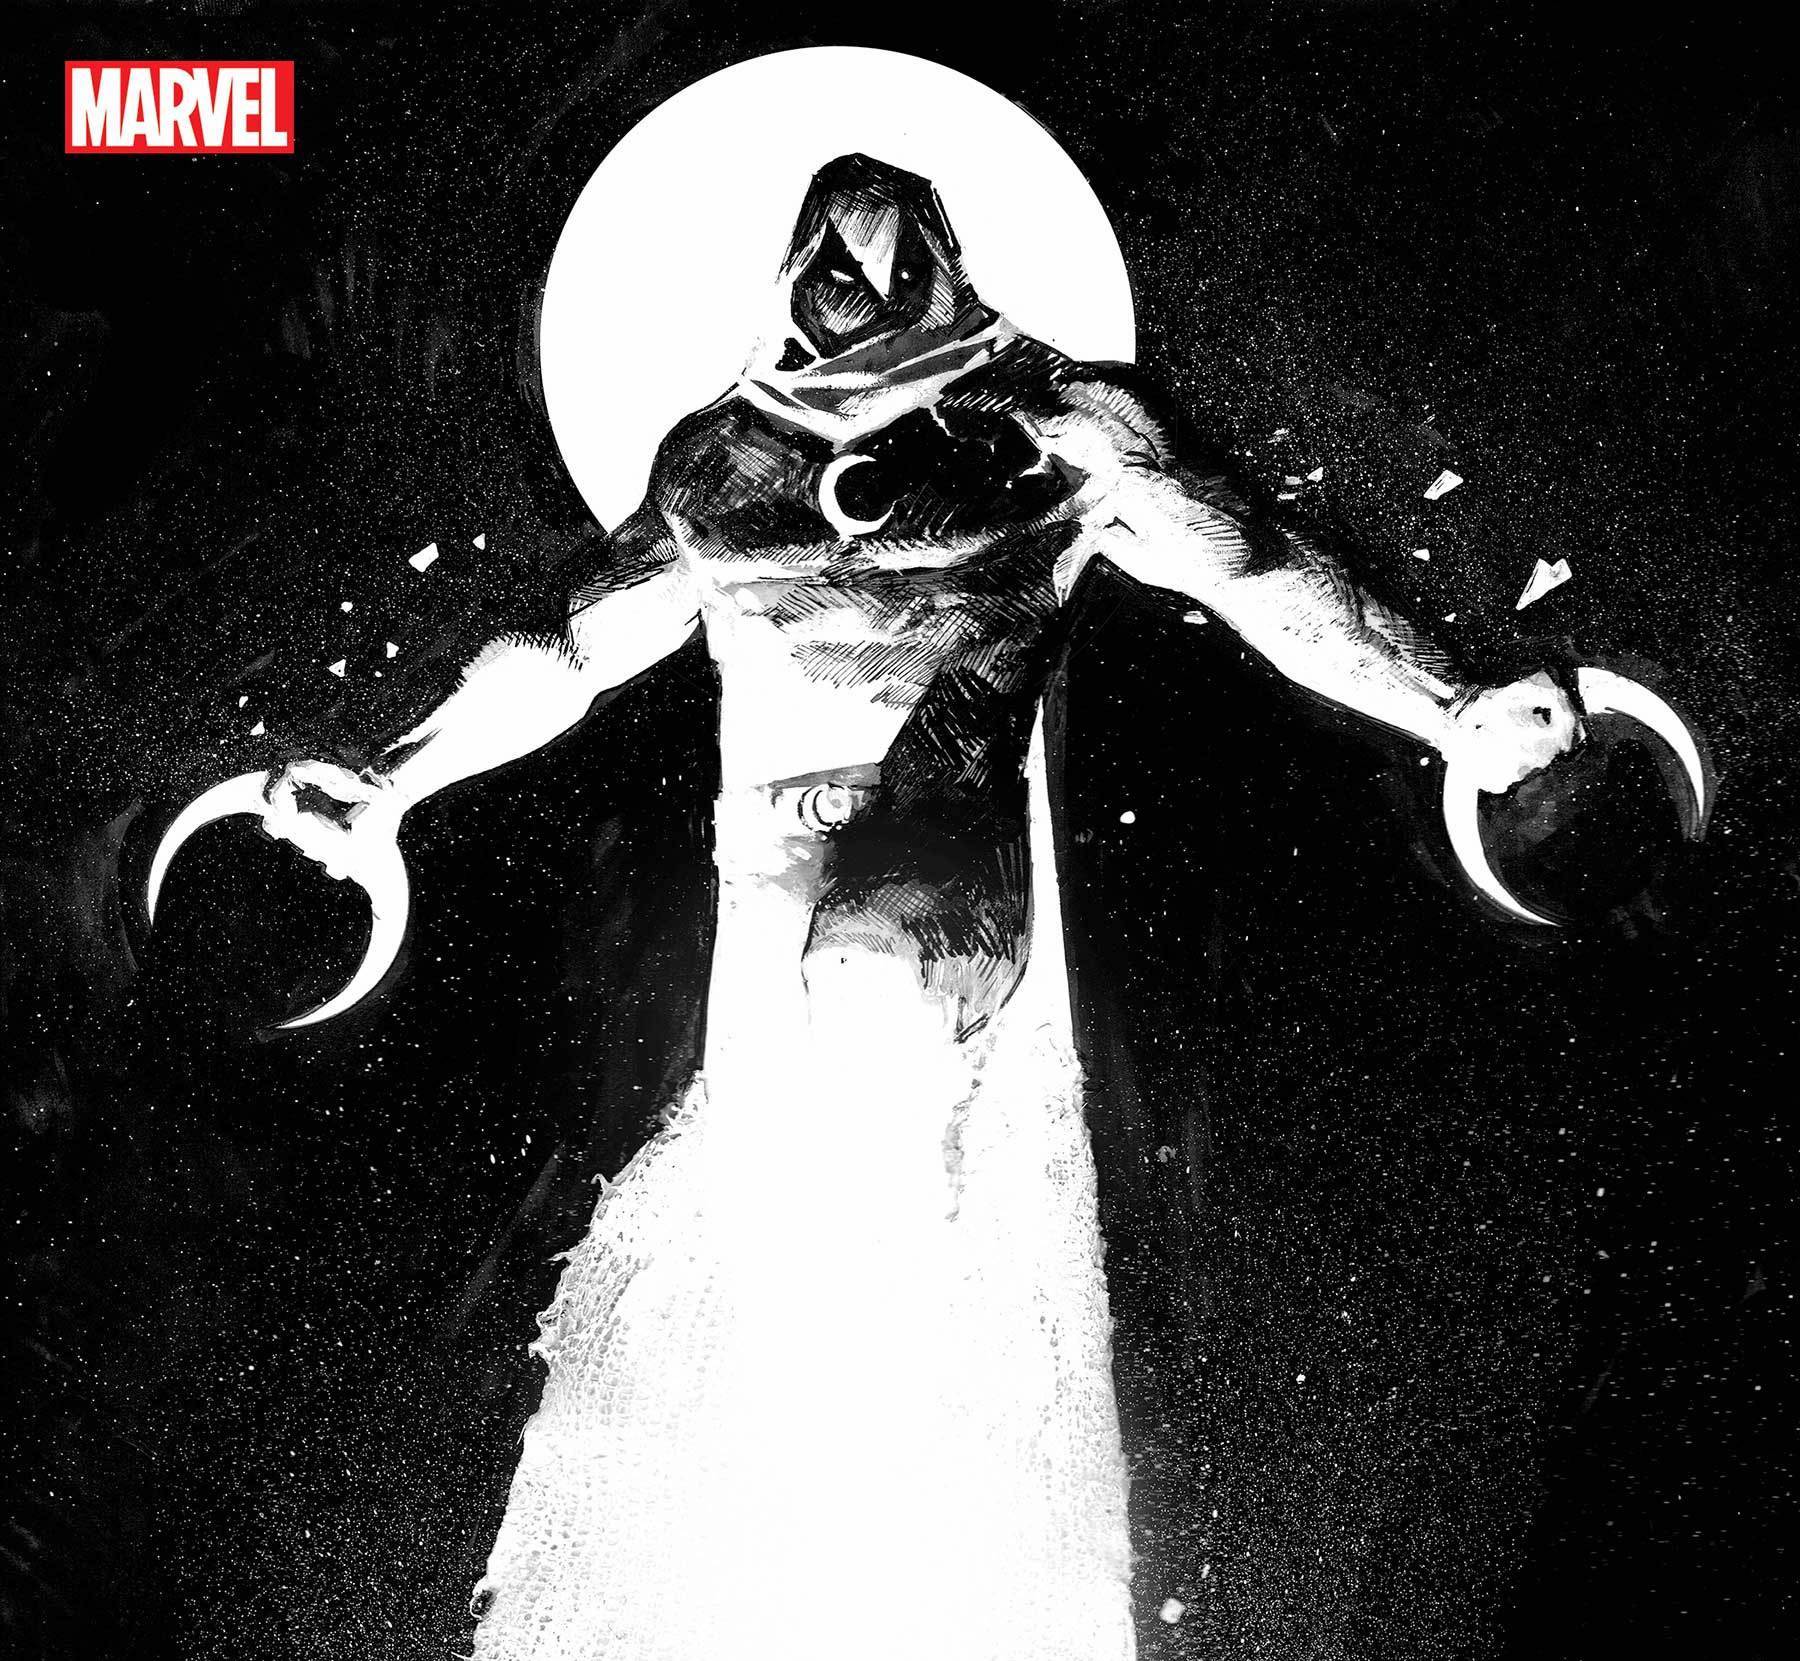 EXCLUSIVE Marvel First Look: Moon Knight #1 variant covers